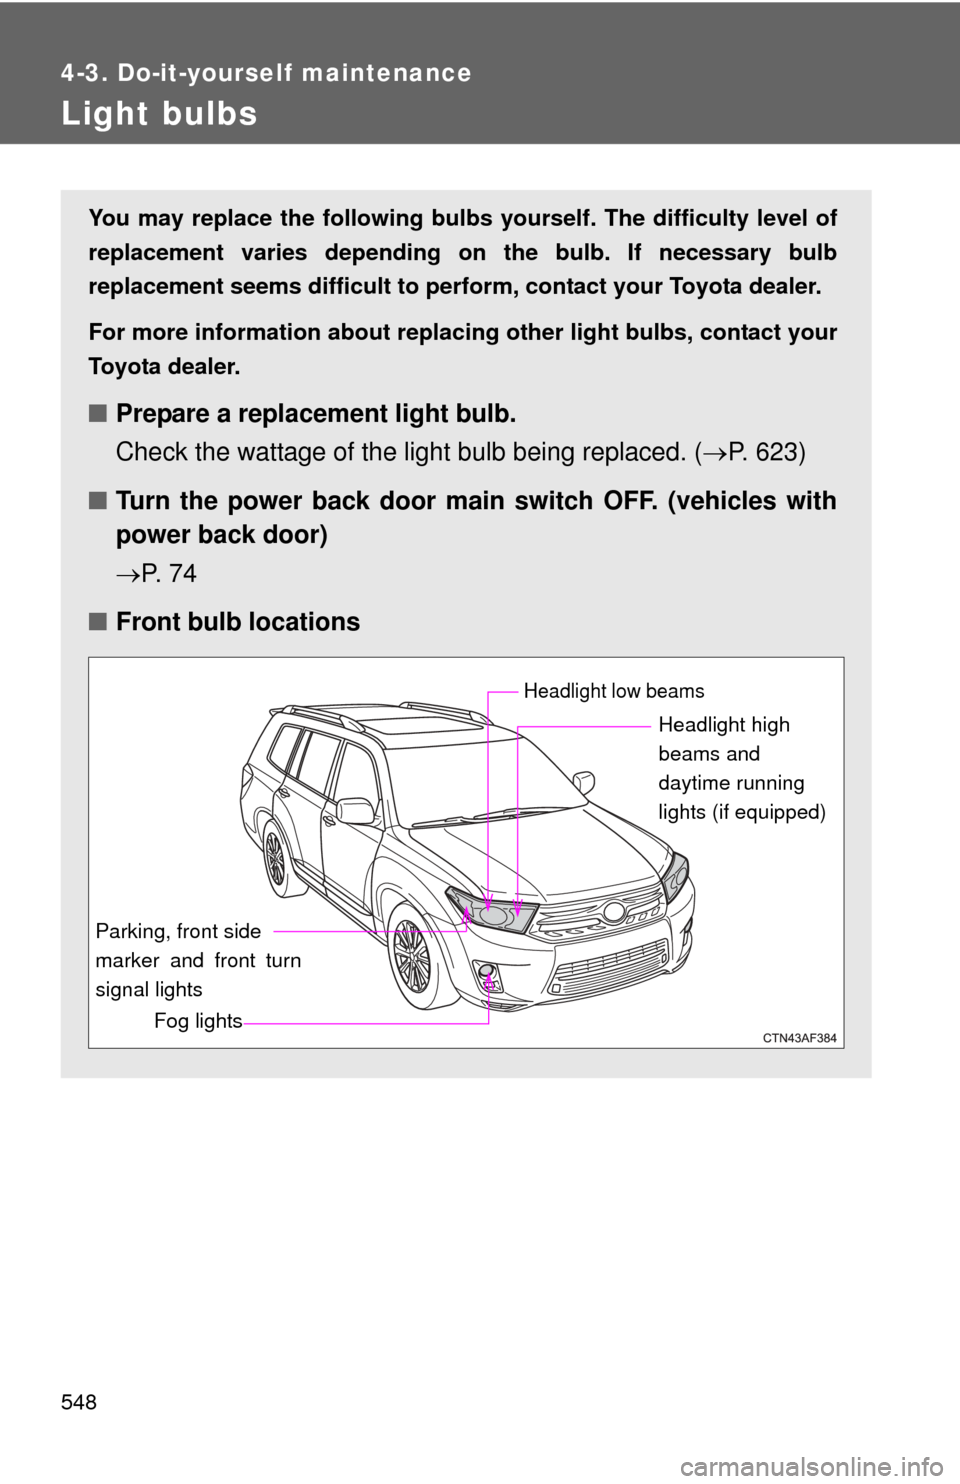 TOYOTA HIGHLANDER HYBRID 2013 XU50 / 3.G Manual PDF 548
4-3. Do-it-yourself maintenance
Light bulbs
You may replace the following bulbs yourself. The difficulty level of
replacement varies depending on the bulb. If necessary bulb
replacement seems diff